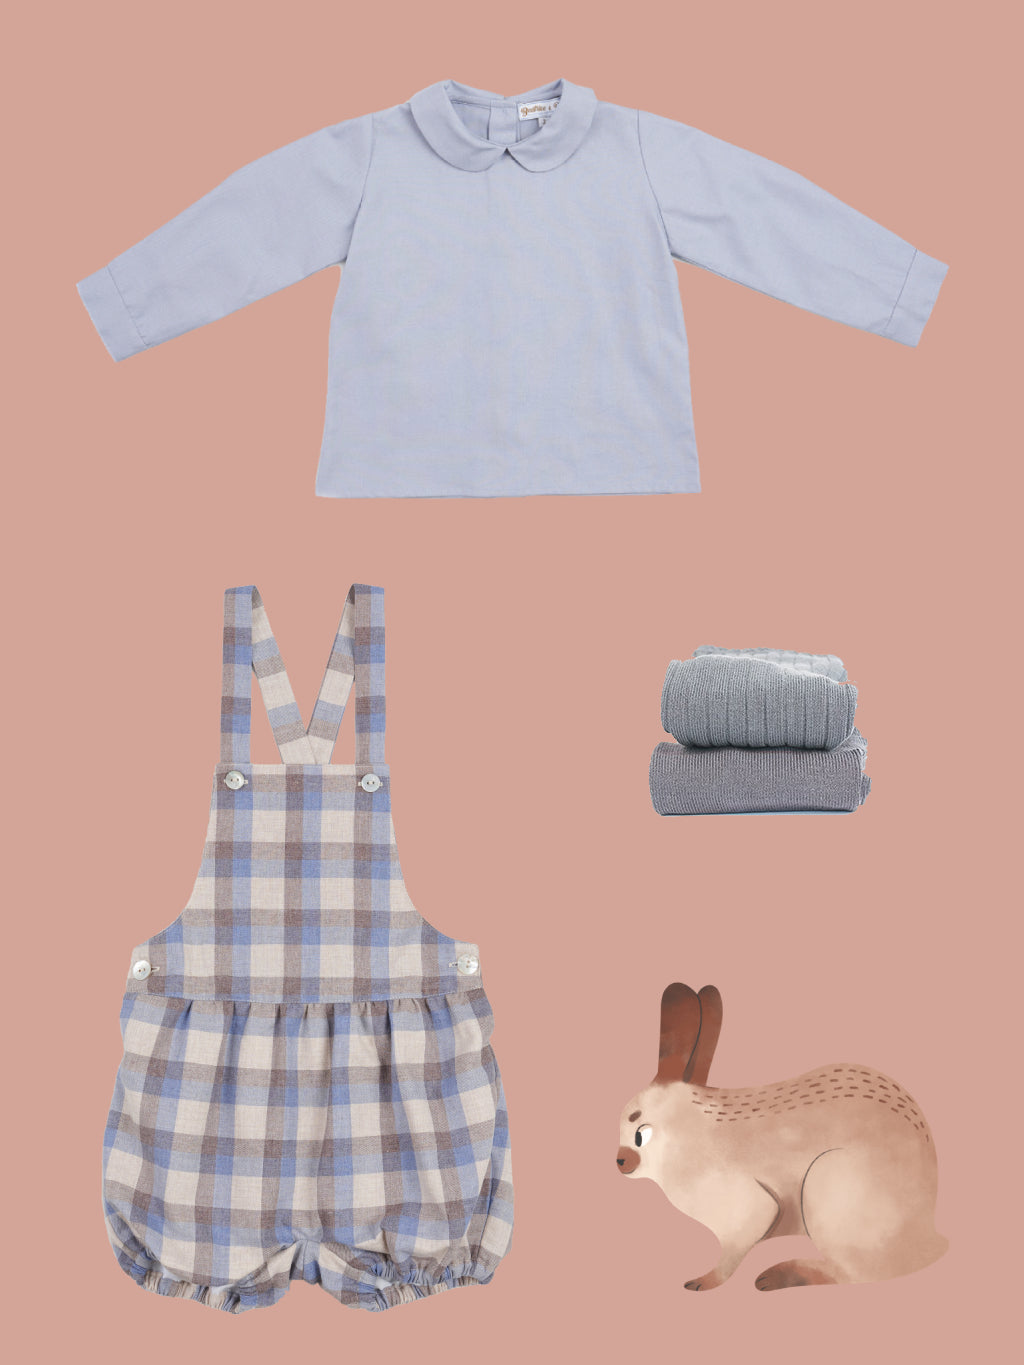 autumn baby boy outfit in grey and blue